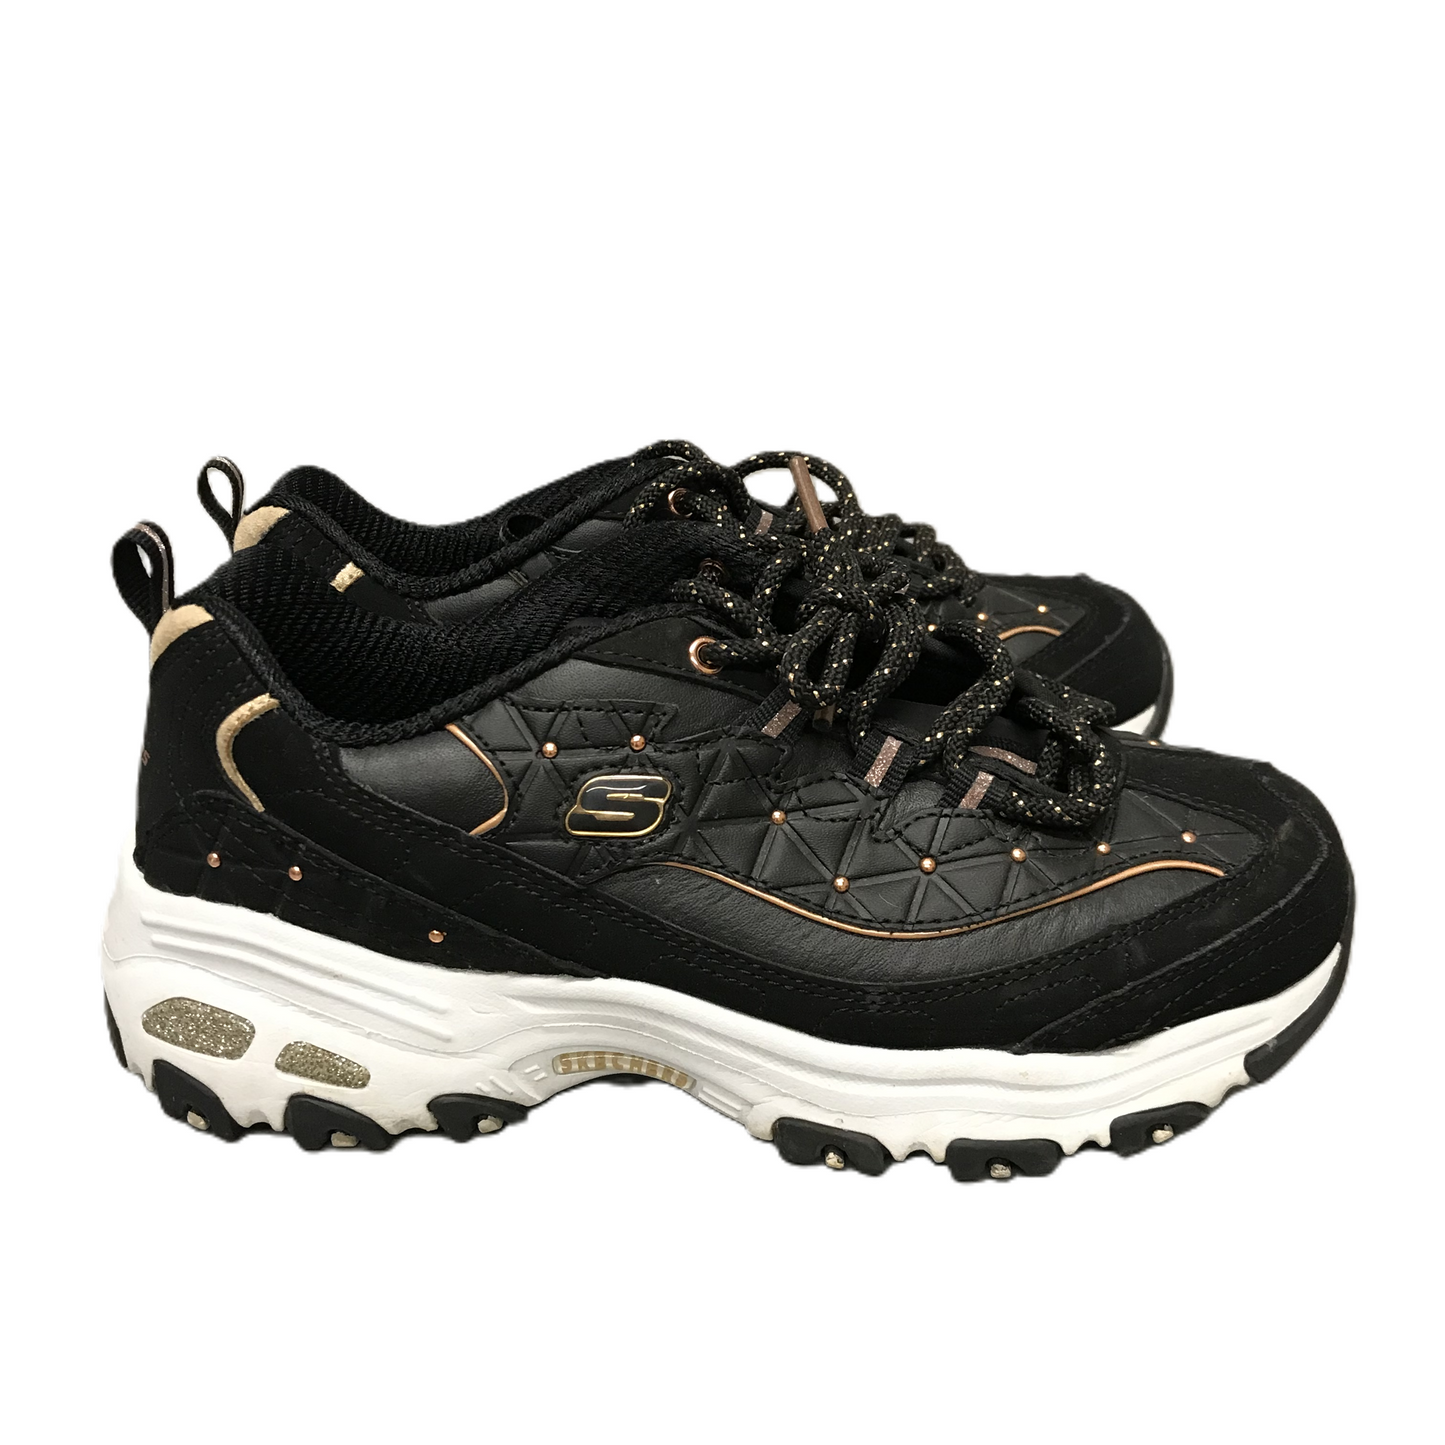 Black Shoes Athletic By Skechers, Size: 6.5